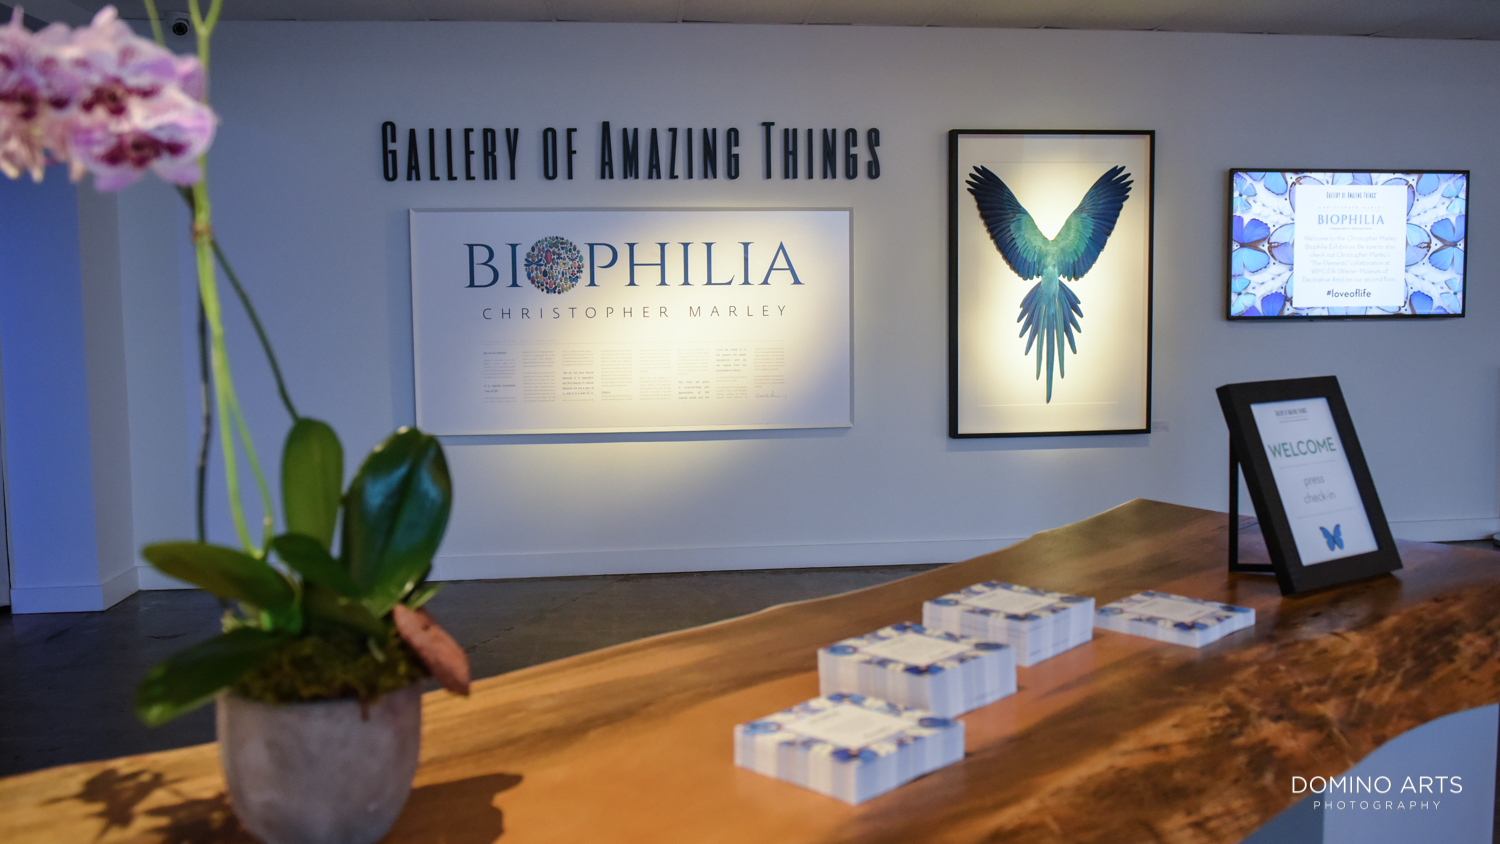 Biophilia by Christopher Marley a dialogue with Art, Nature and Science presented by Gallery of Amazing Things